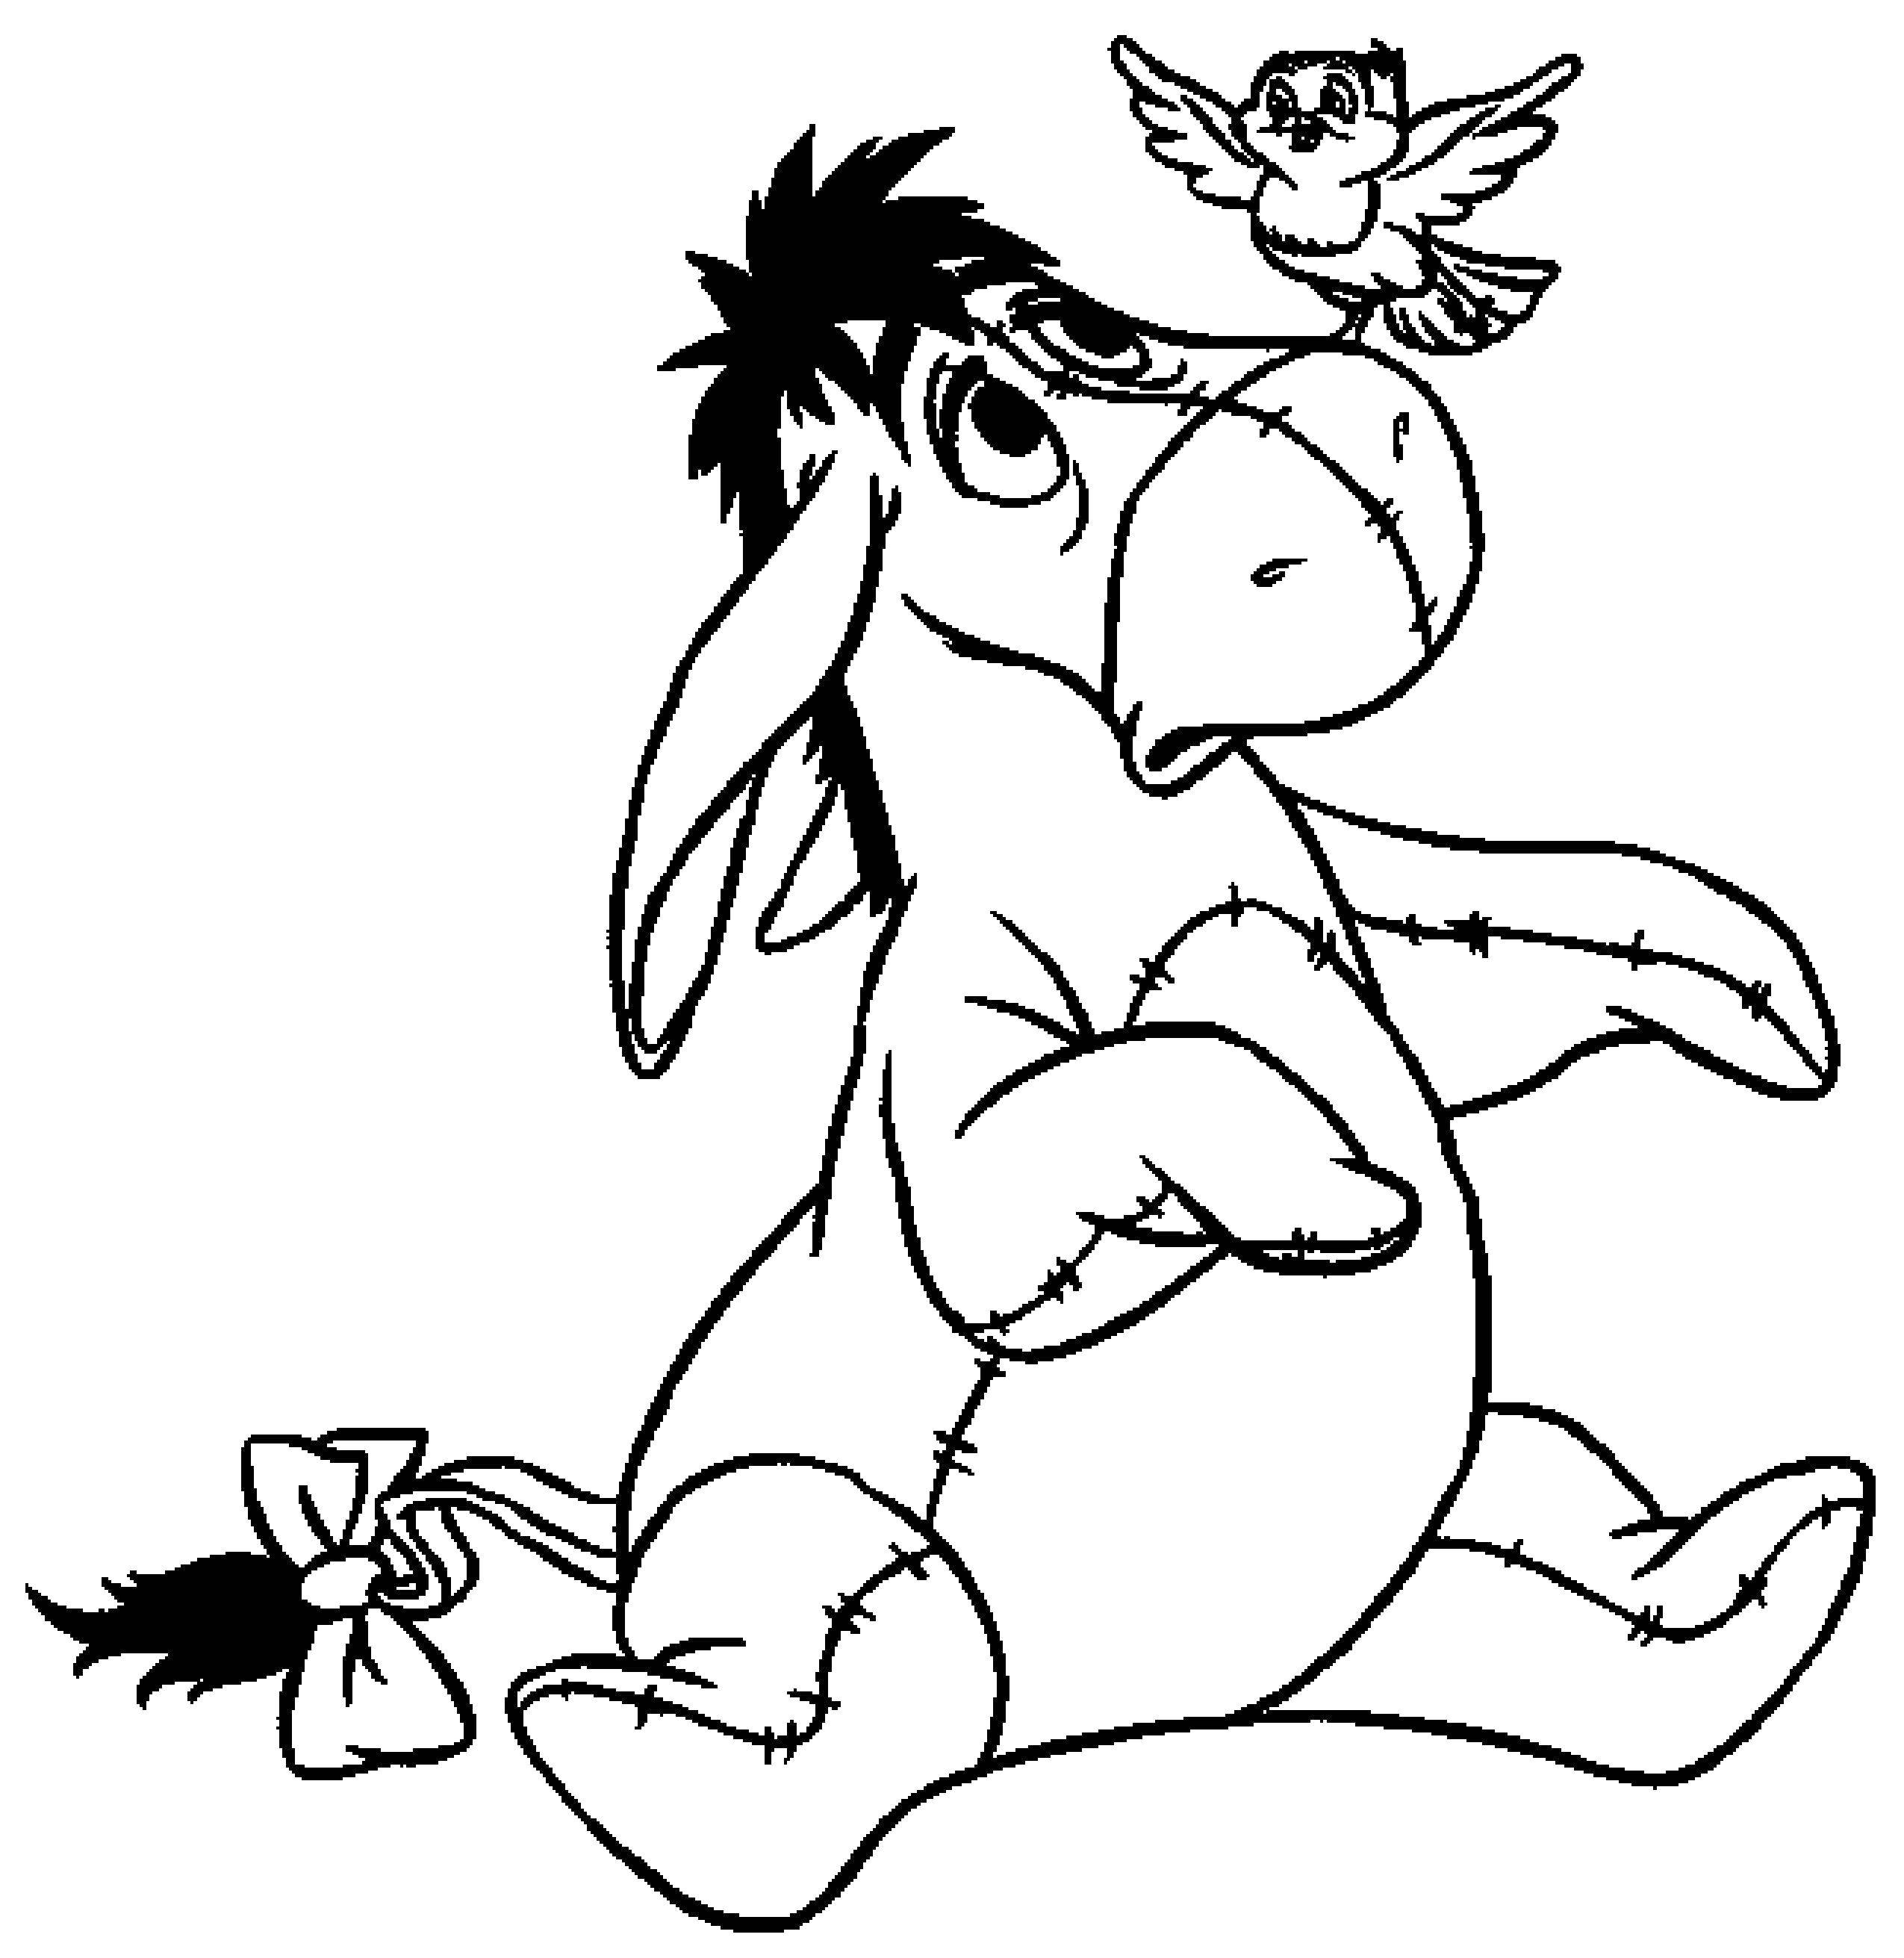 Coloring Eeyore with a bird on his nose. Category For boys . Tags:  Eeyore.